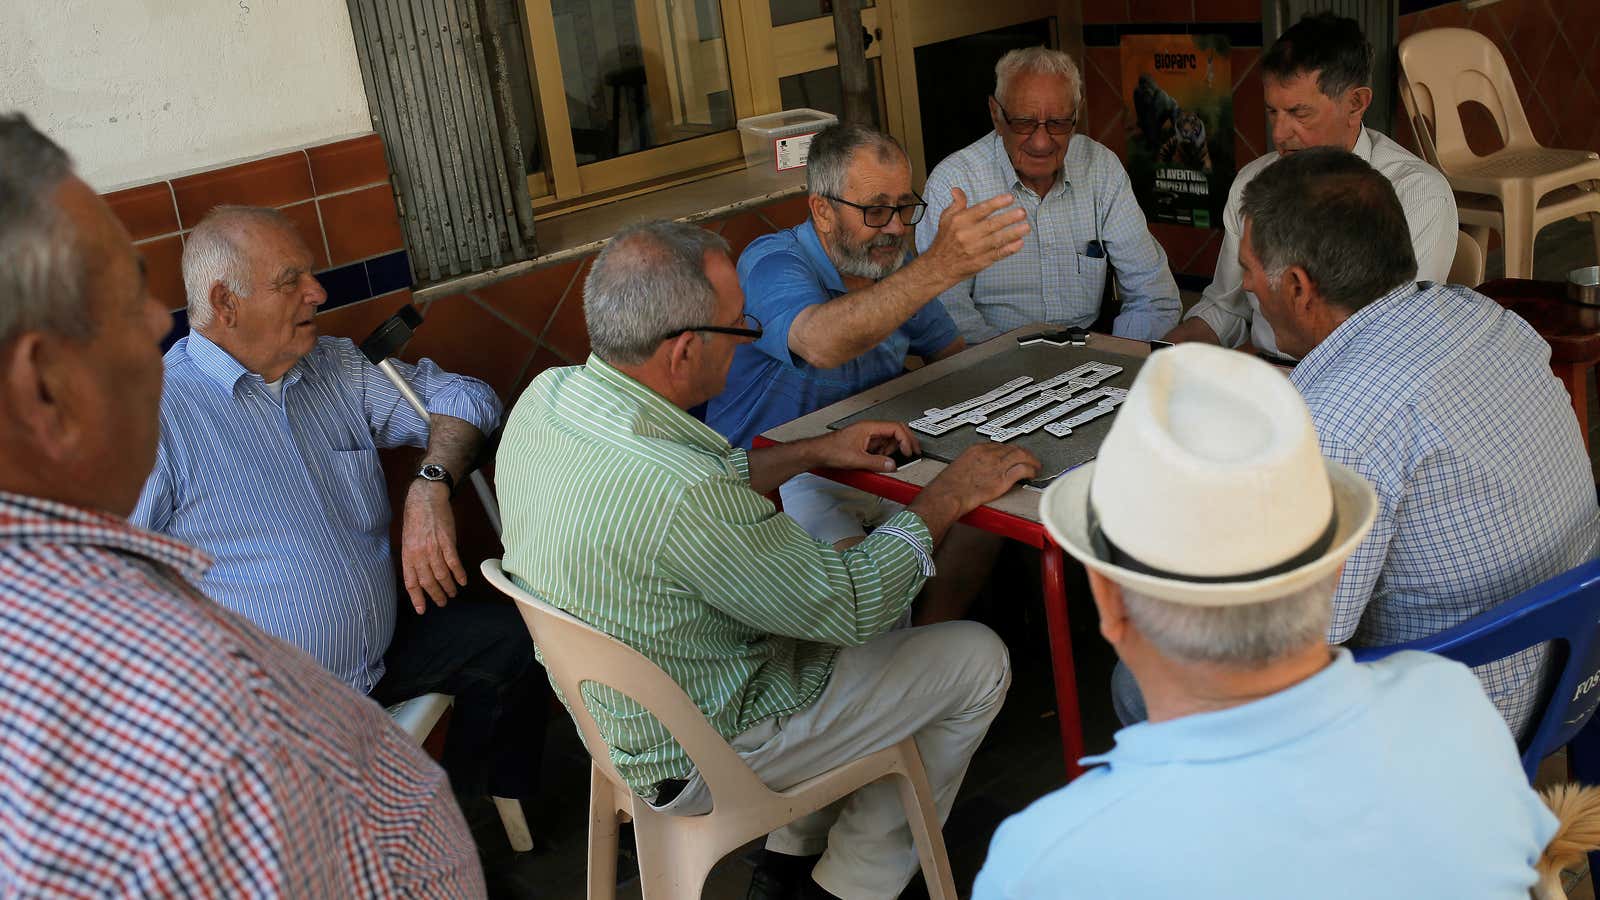 Pensioners playing dominoes in southern Spain.